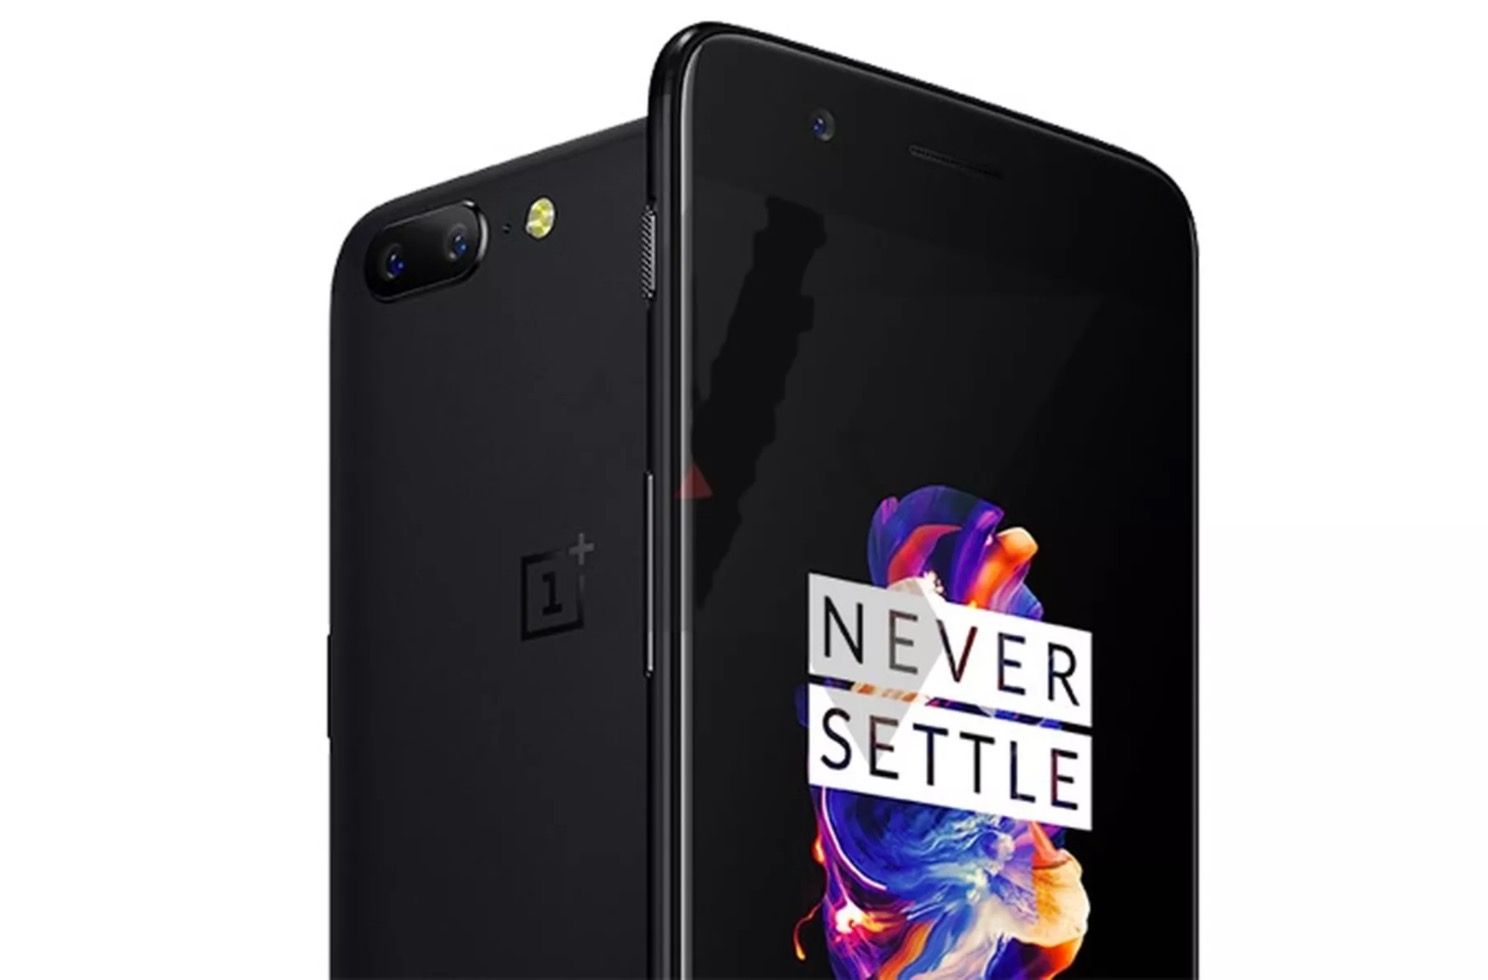 is this the oneplus 5 phone design revealed in super clear image image 1